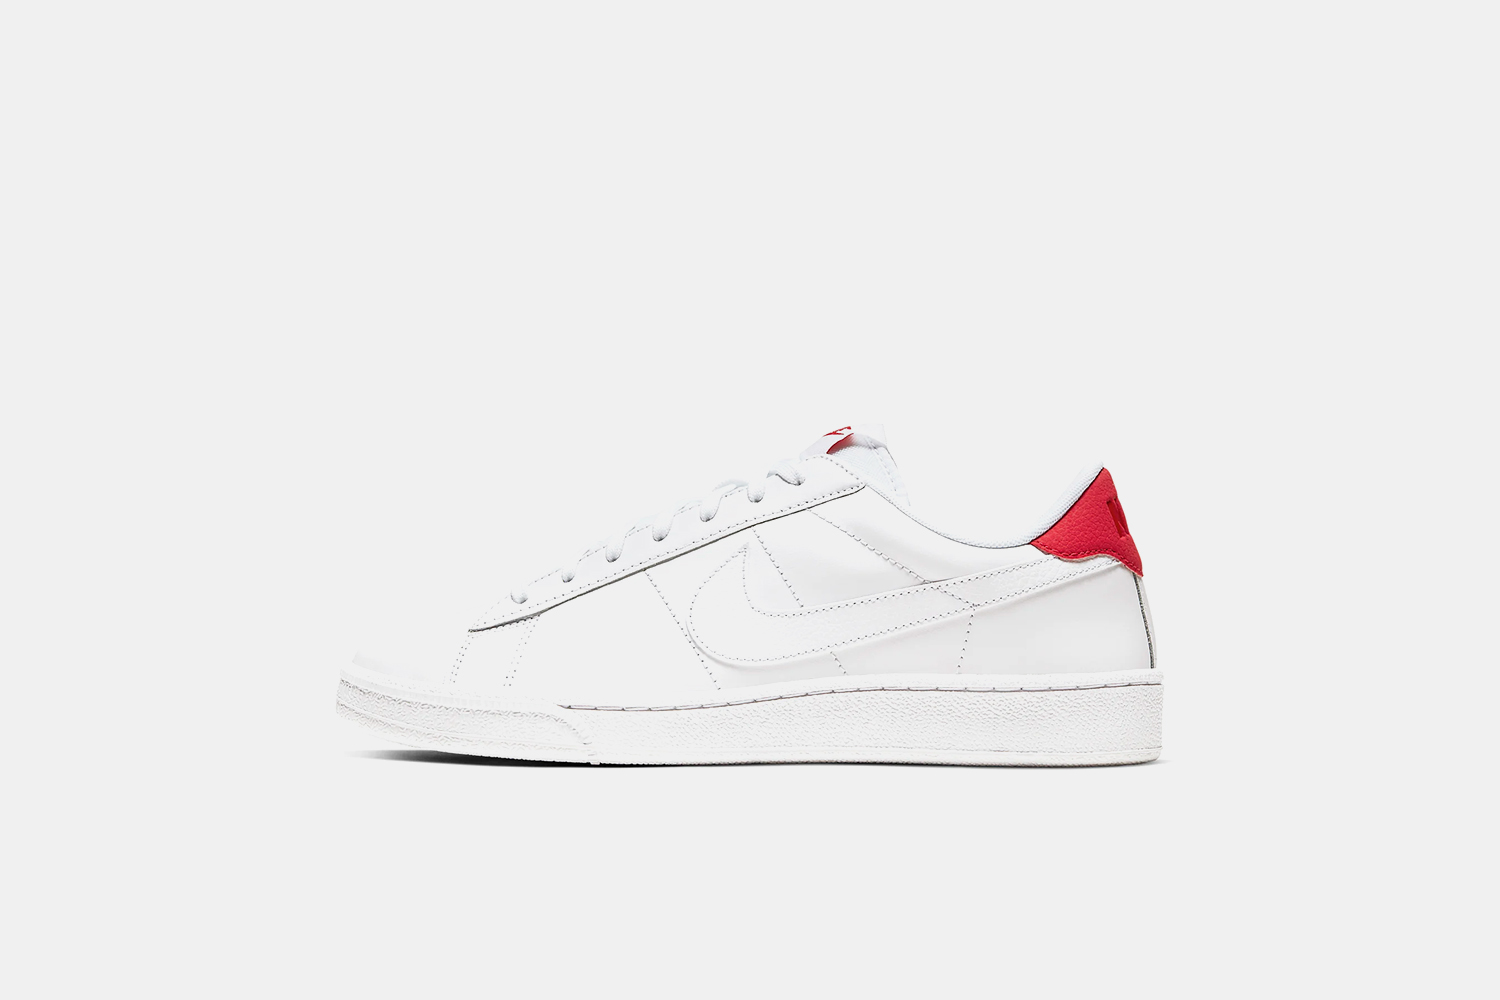 Deal: These Classic Nikes Are Only $60